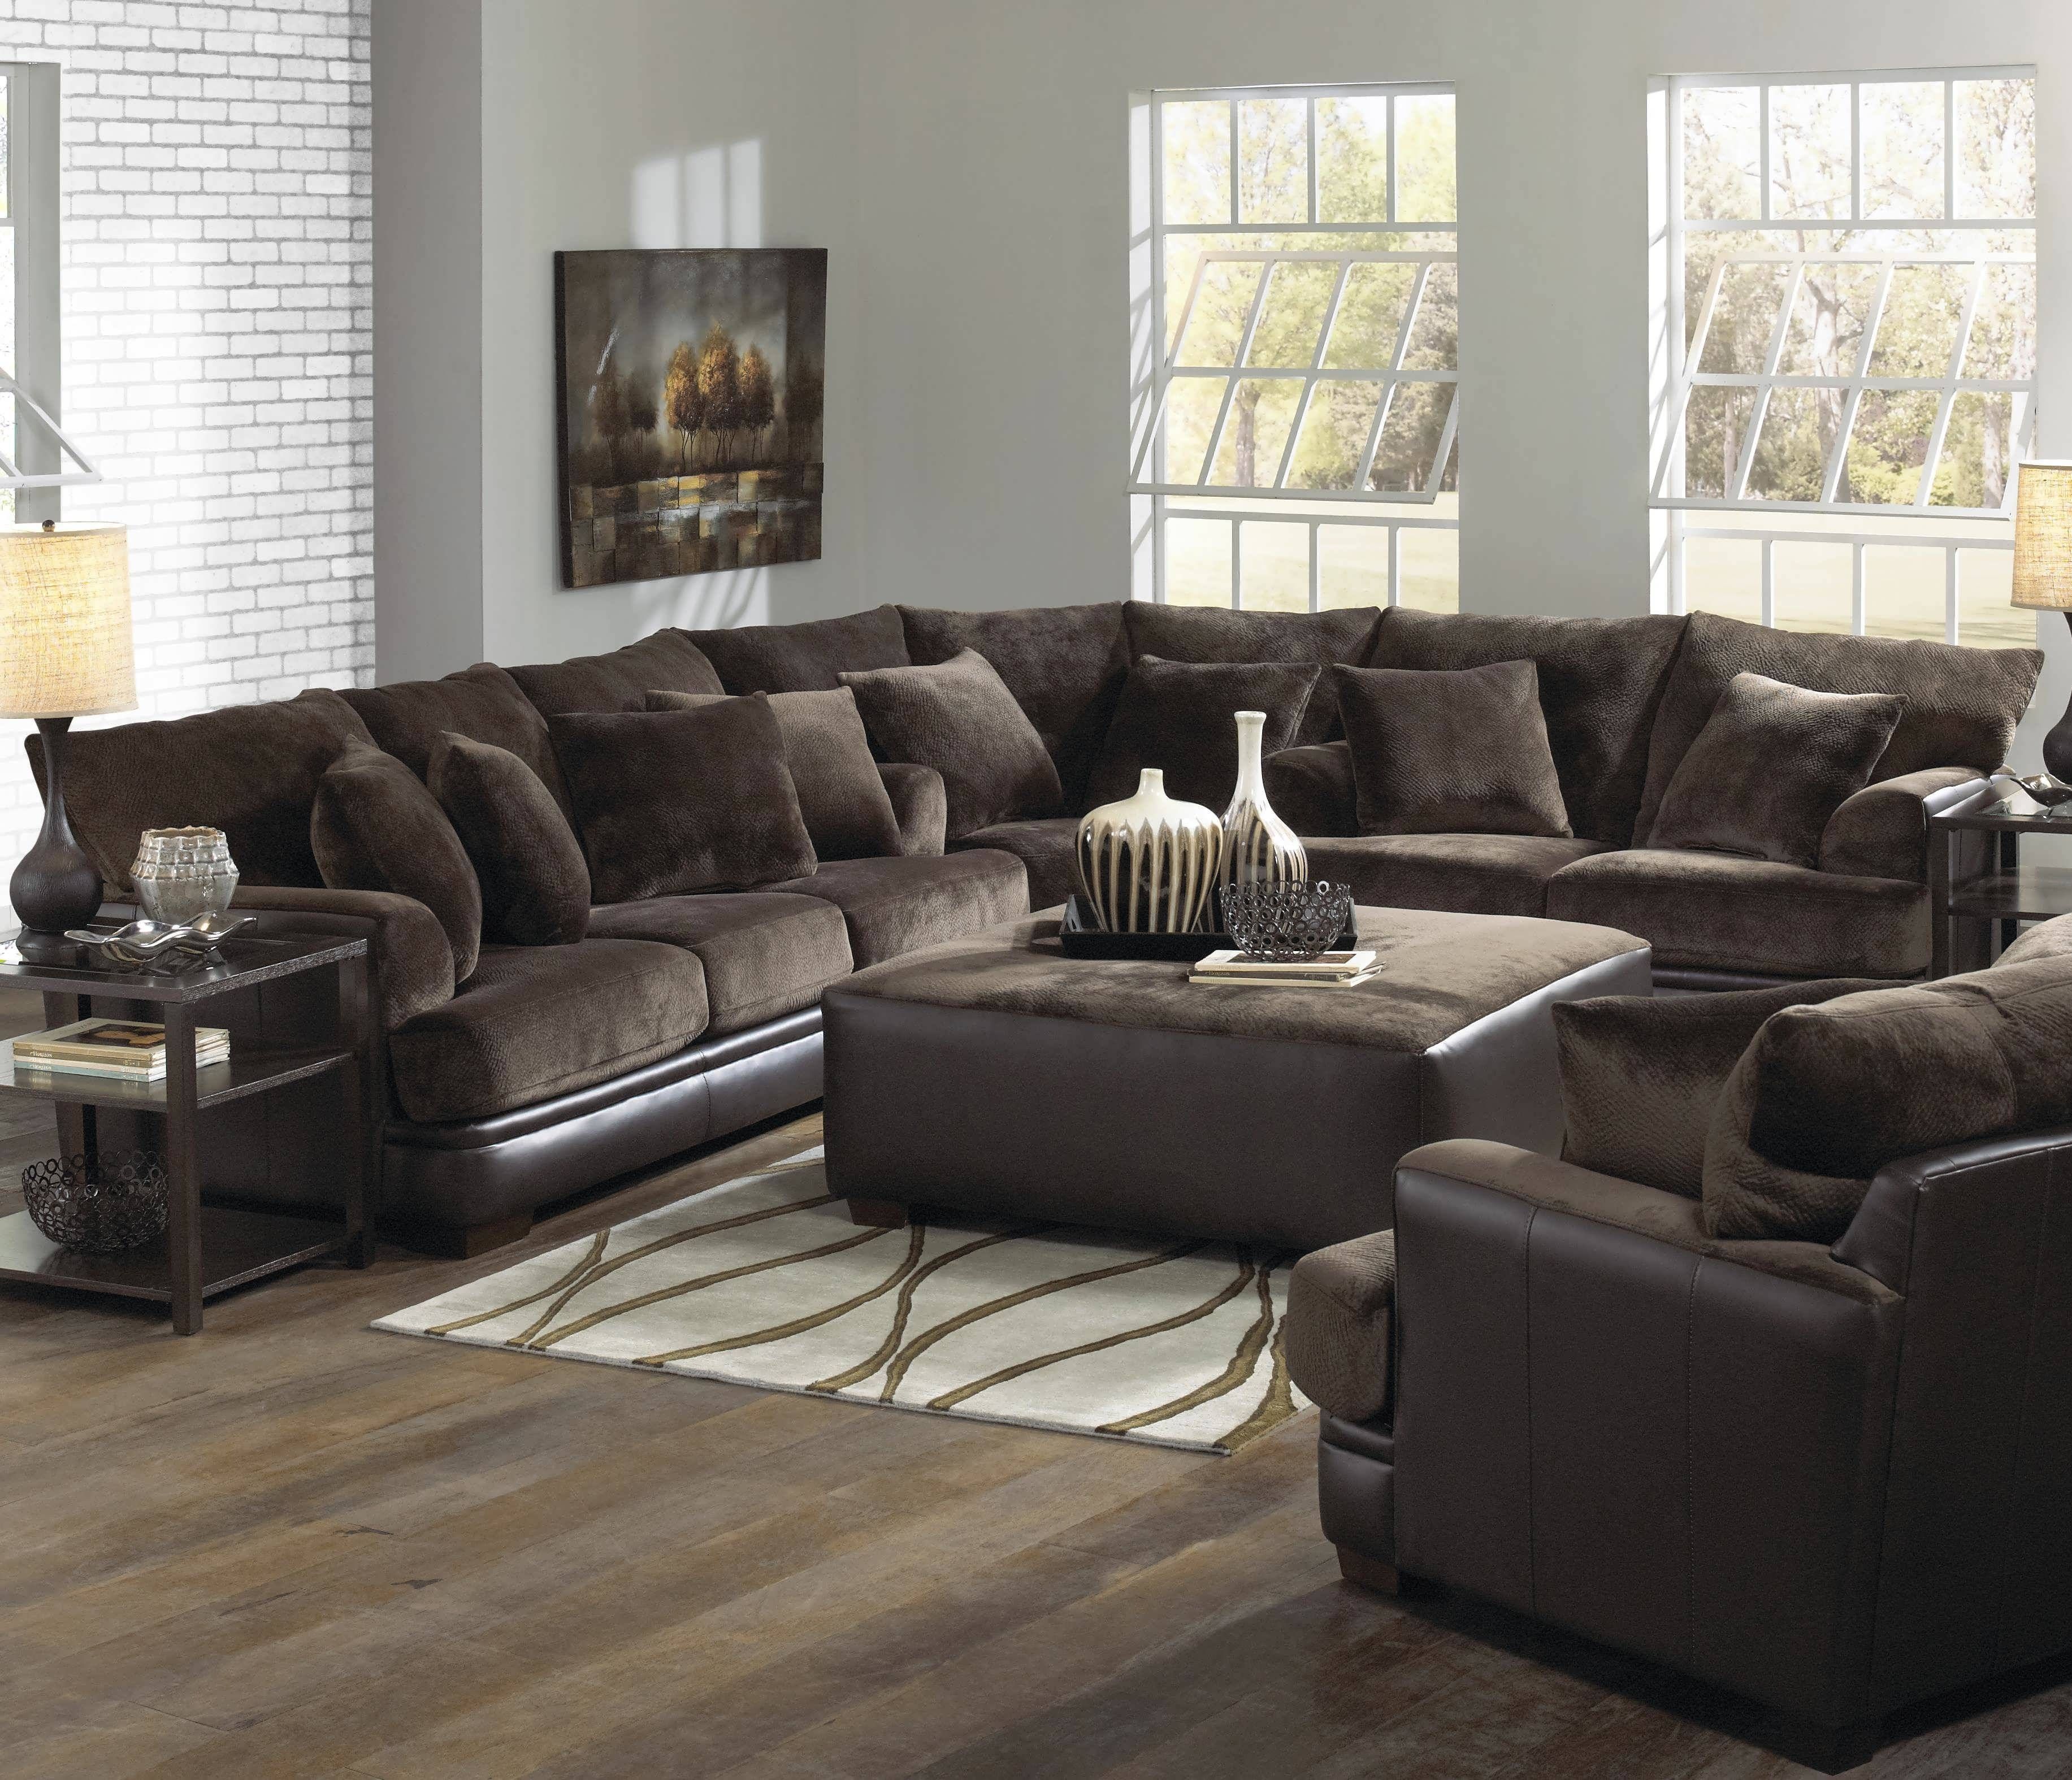 Sofa : Home Living Room Shop Living Room Sets Brown Leather Sofa For Simple Sofas (View 13 of 15)